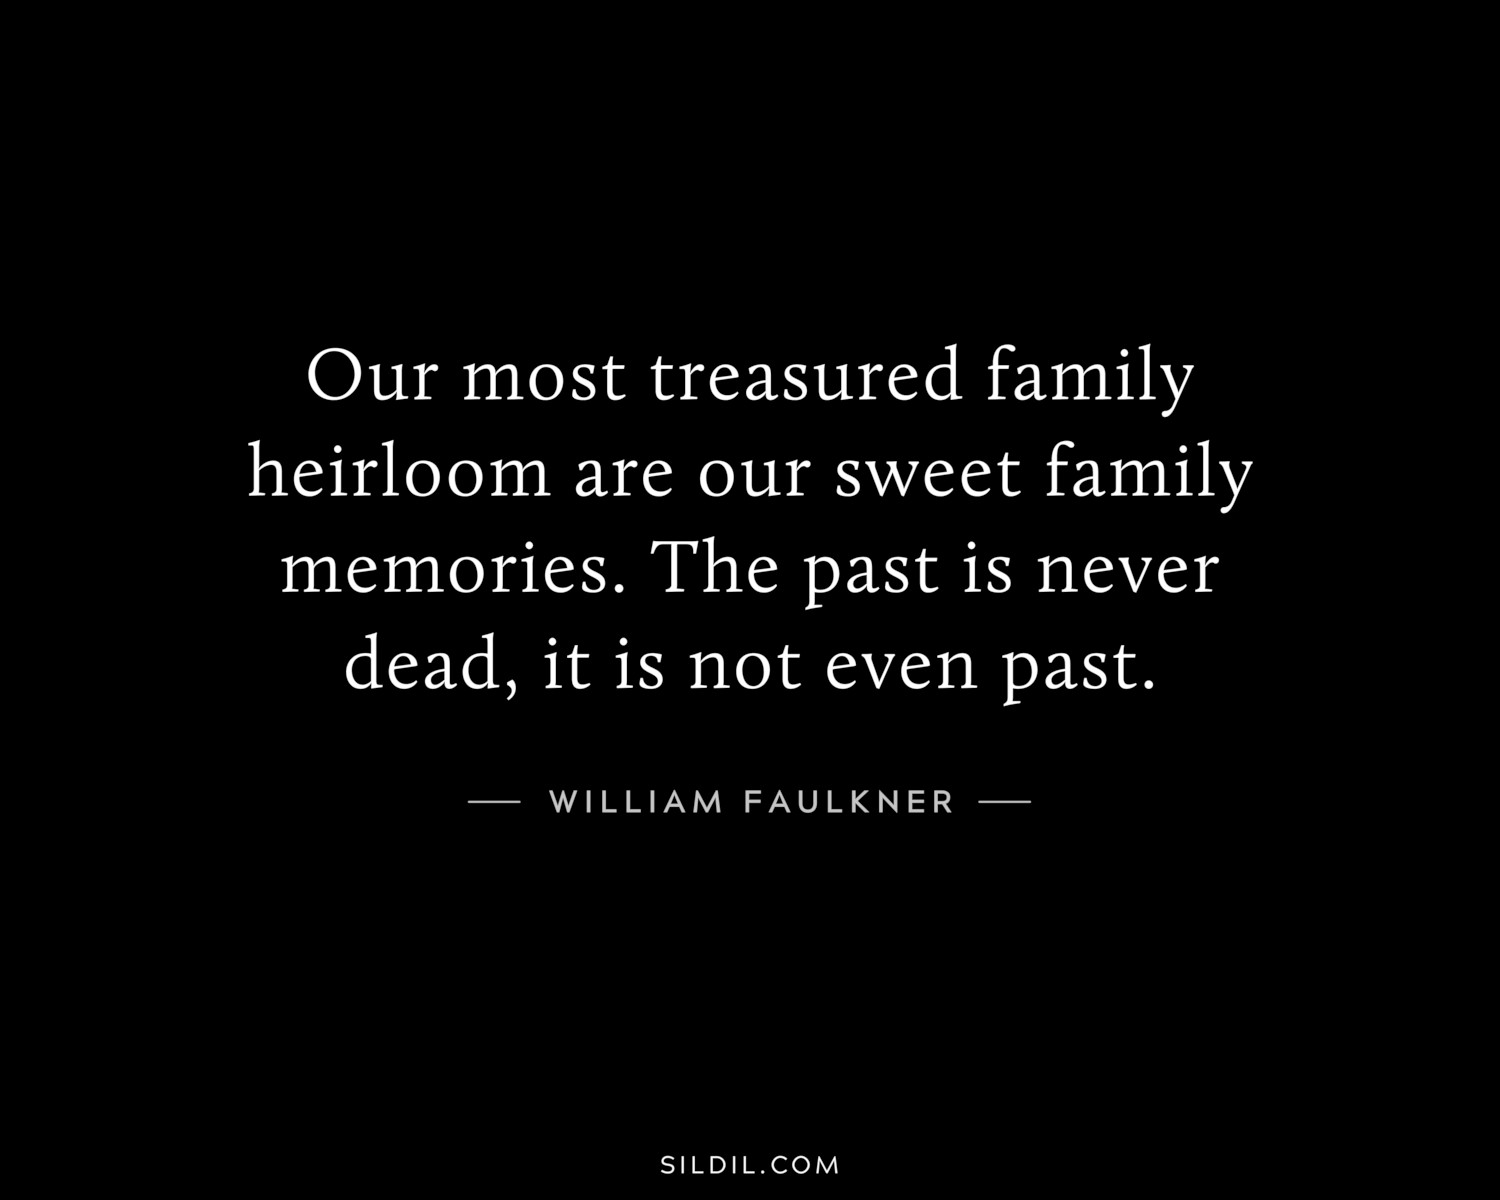 Our most treasured family heirloom are our sweet family memories. The past is never dead, it is not even past.